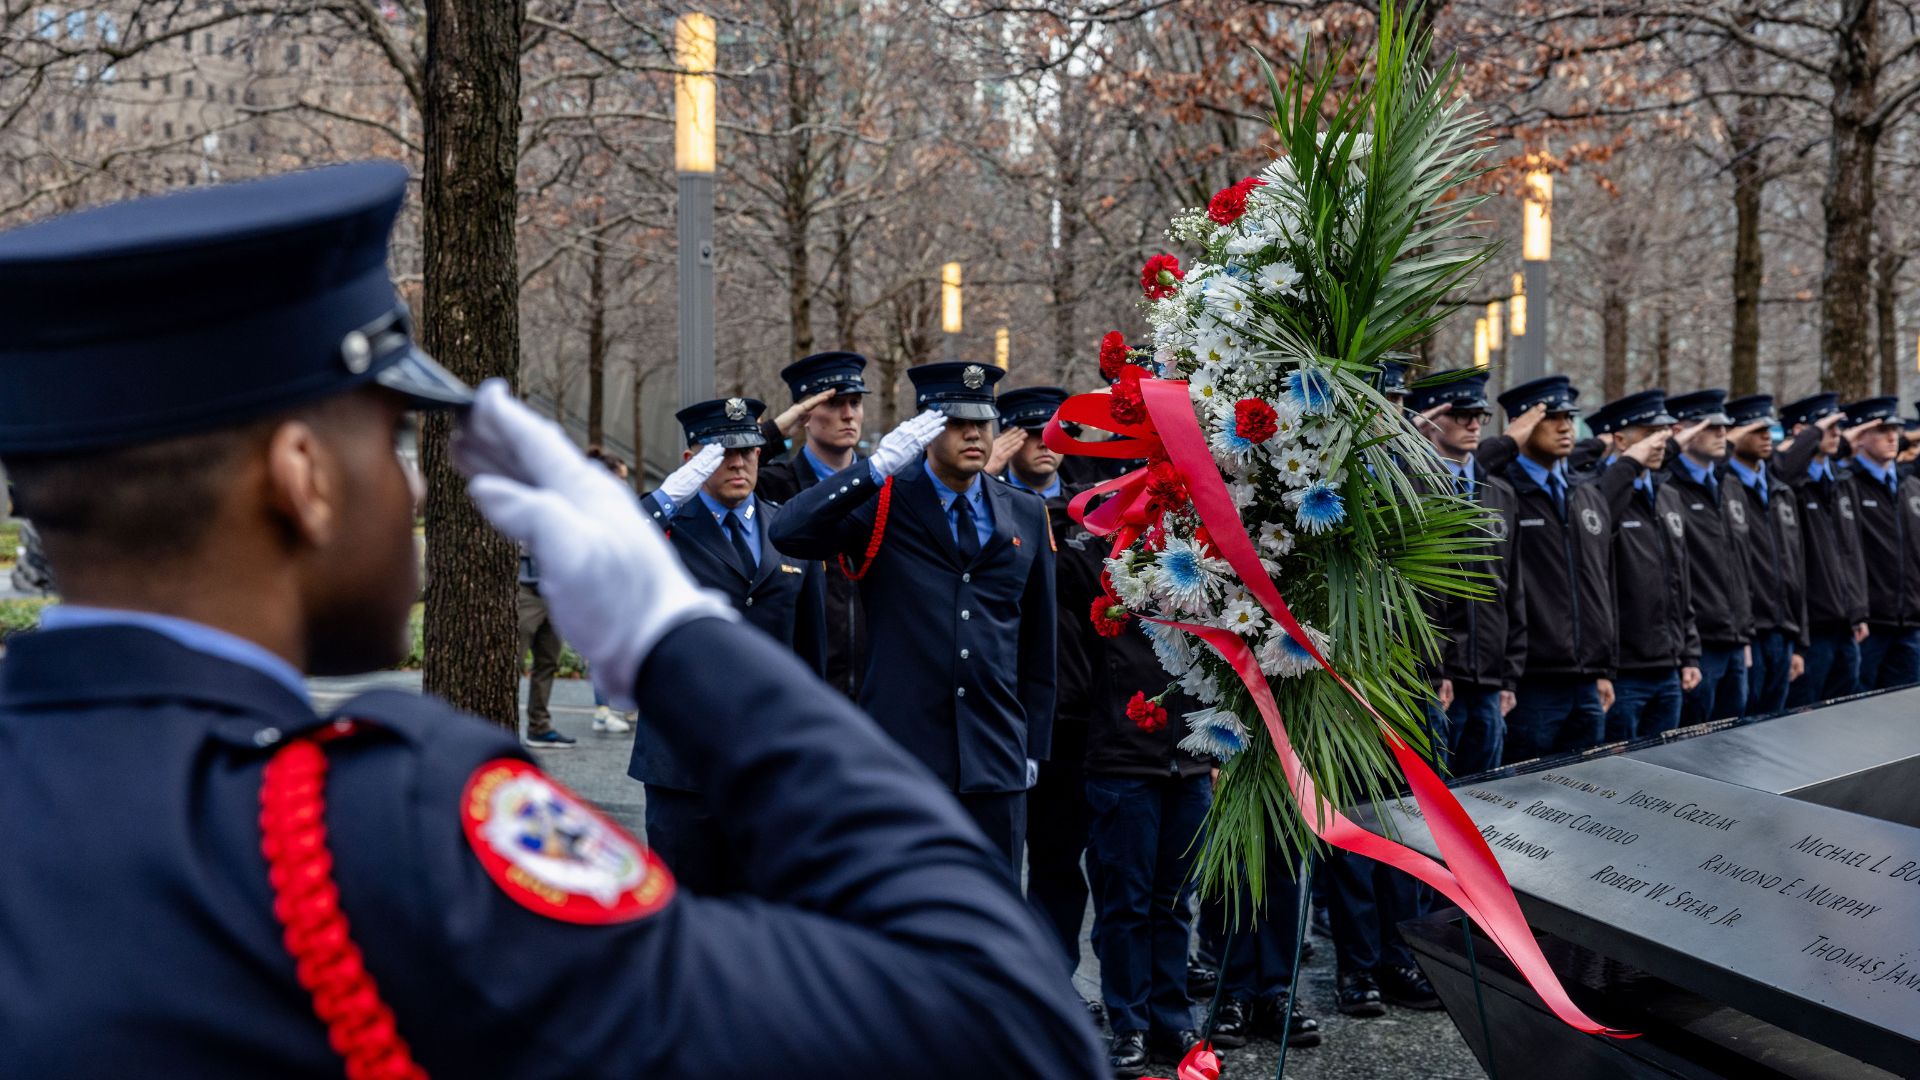 Probationary FDNY officers in uniform along the Memorial. At the foreground, a back view of one probie saluting.